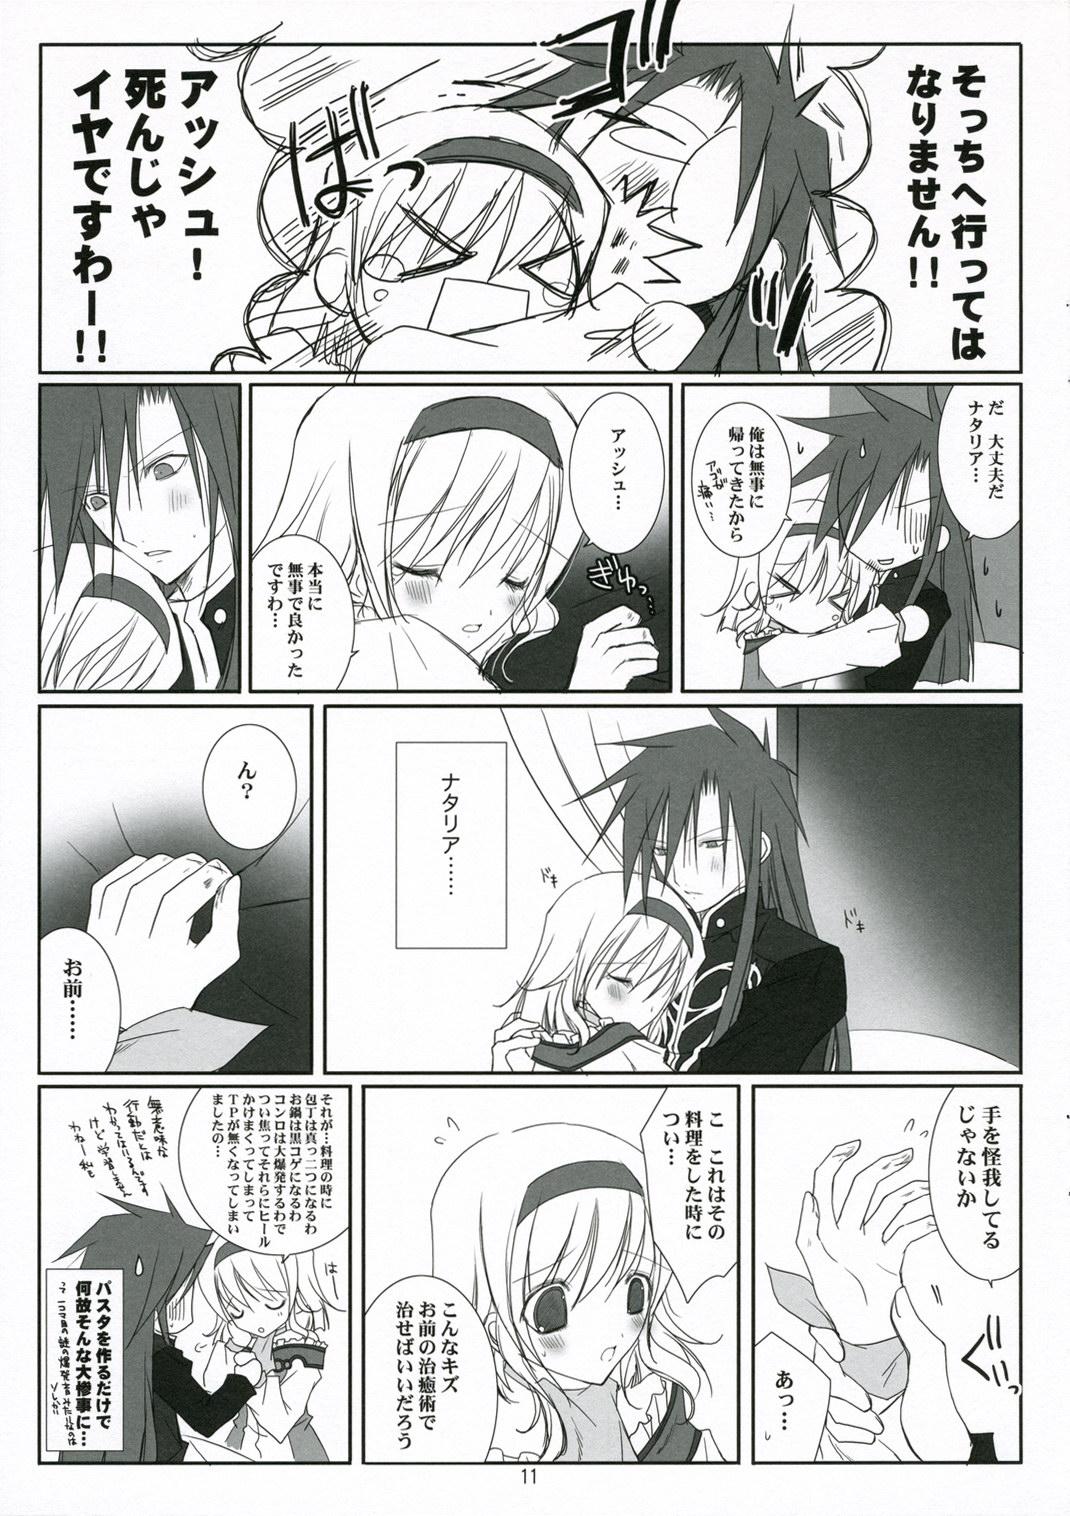 Hardcore Gay HONEYED - Tales of the abyss Compilation - Page 11